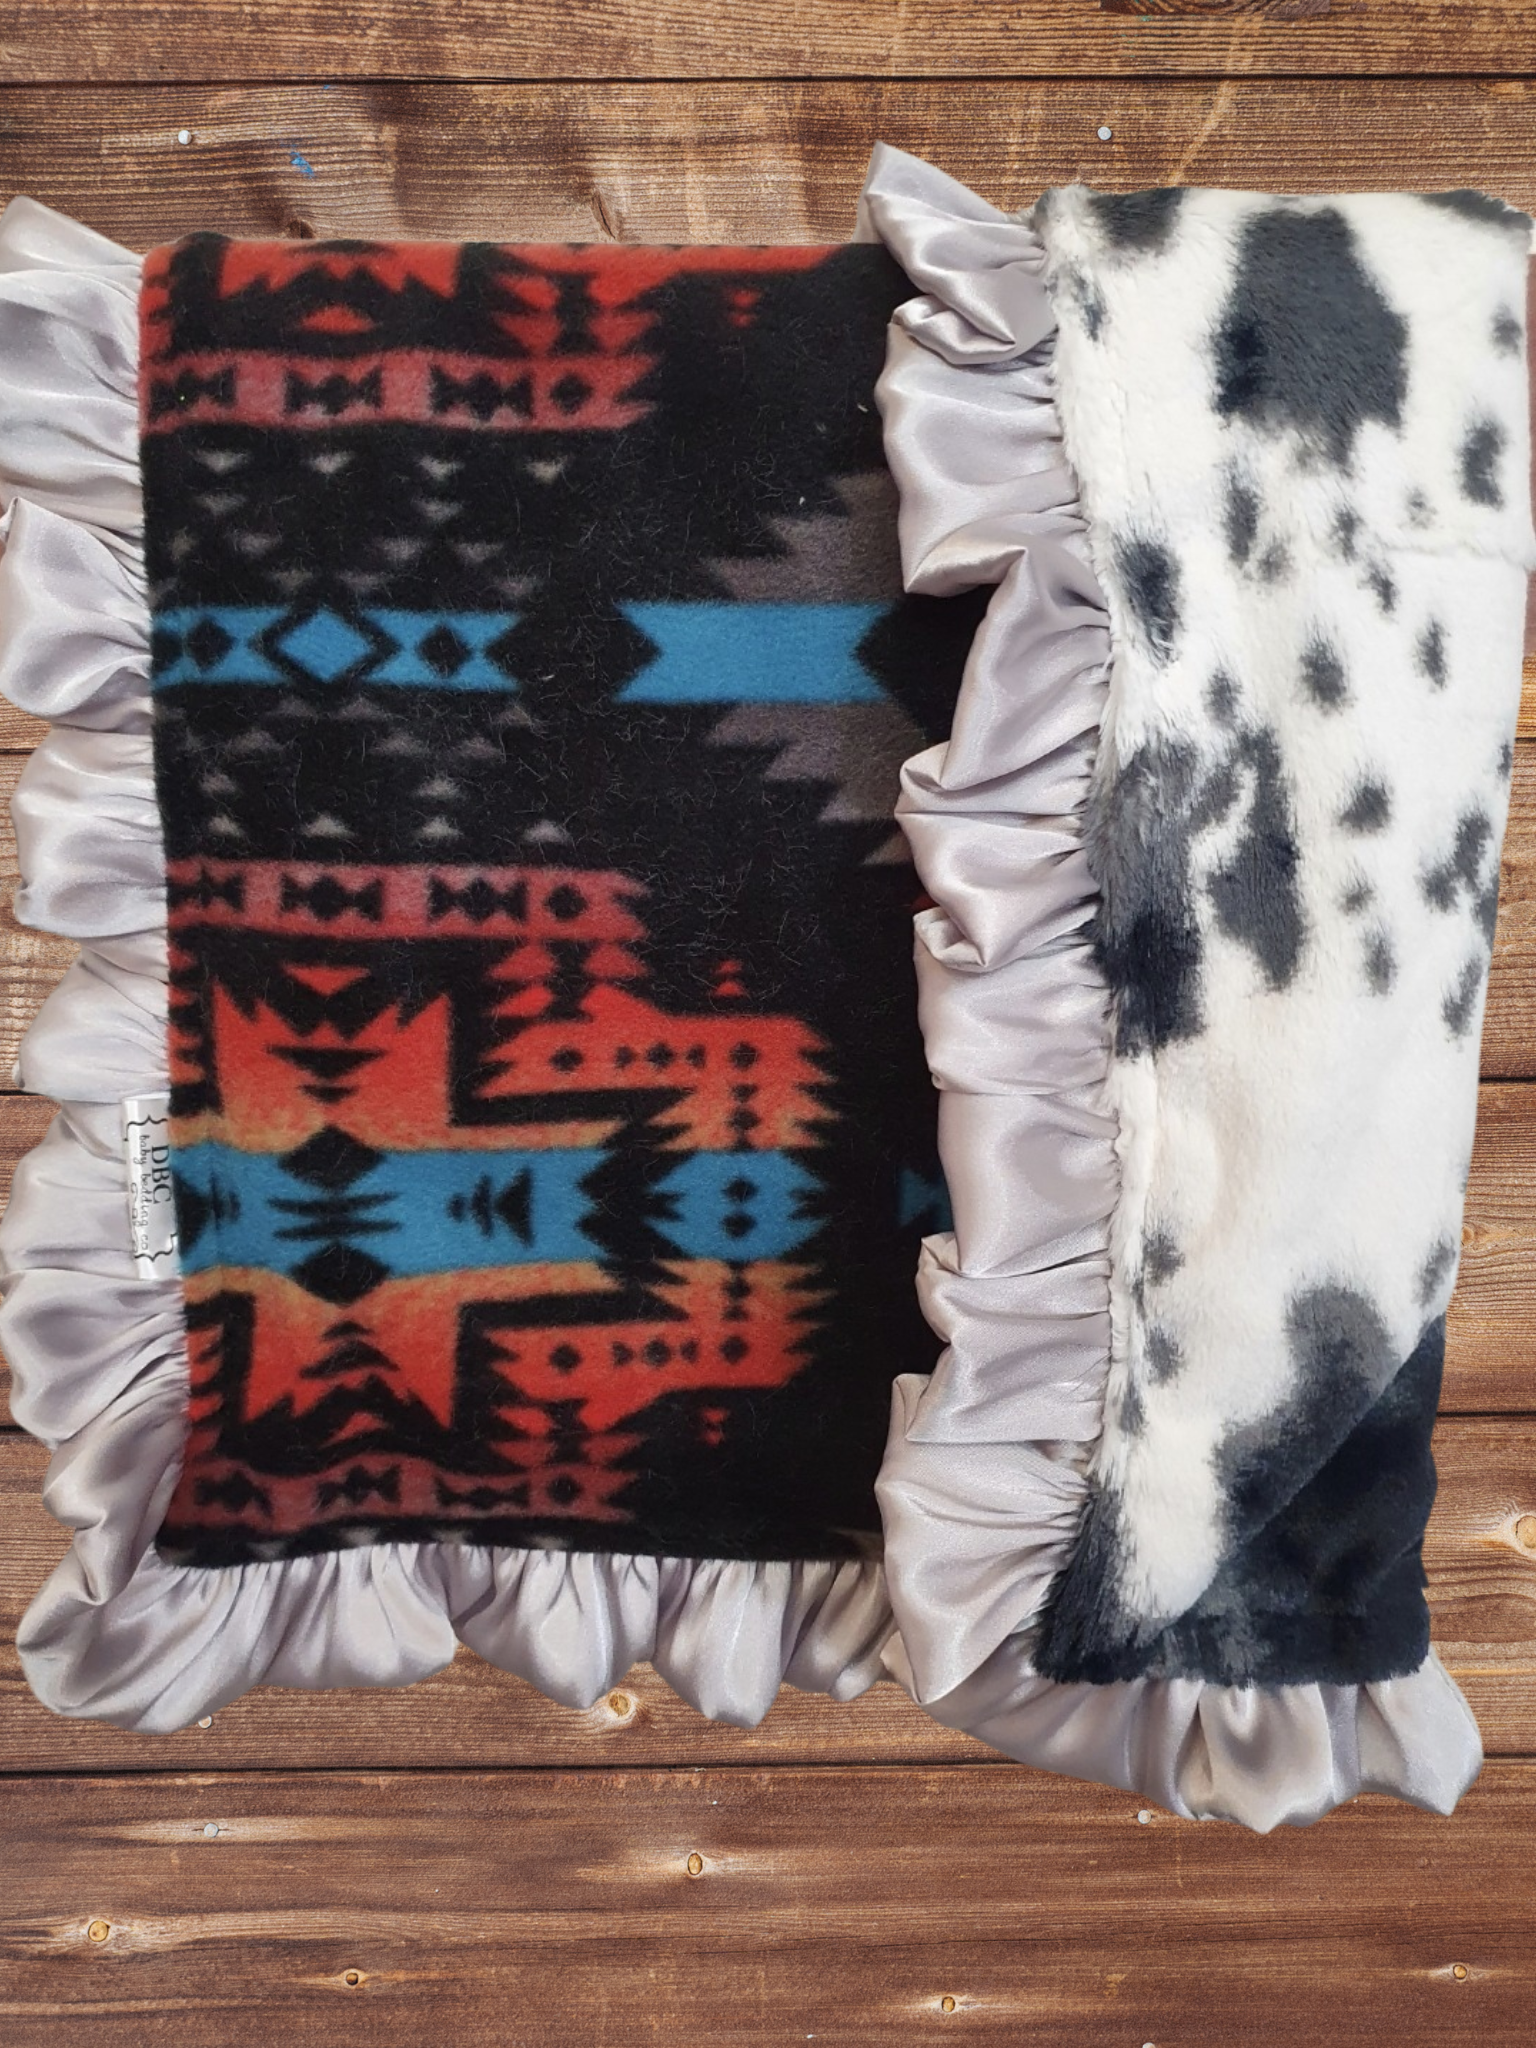 Ruffle Baby Lovey - Black Aztec and Storm Cow Minky Western Lovey - DBC Baby Bedding Co 